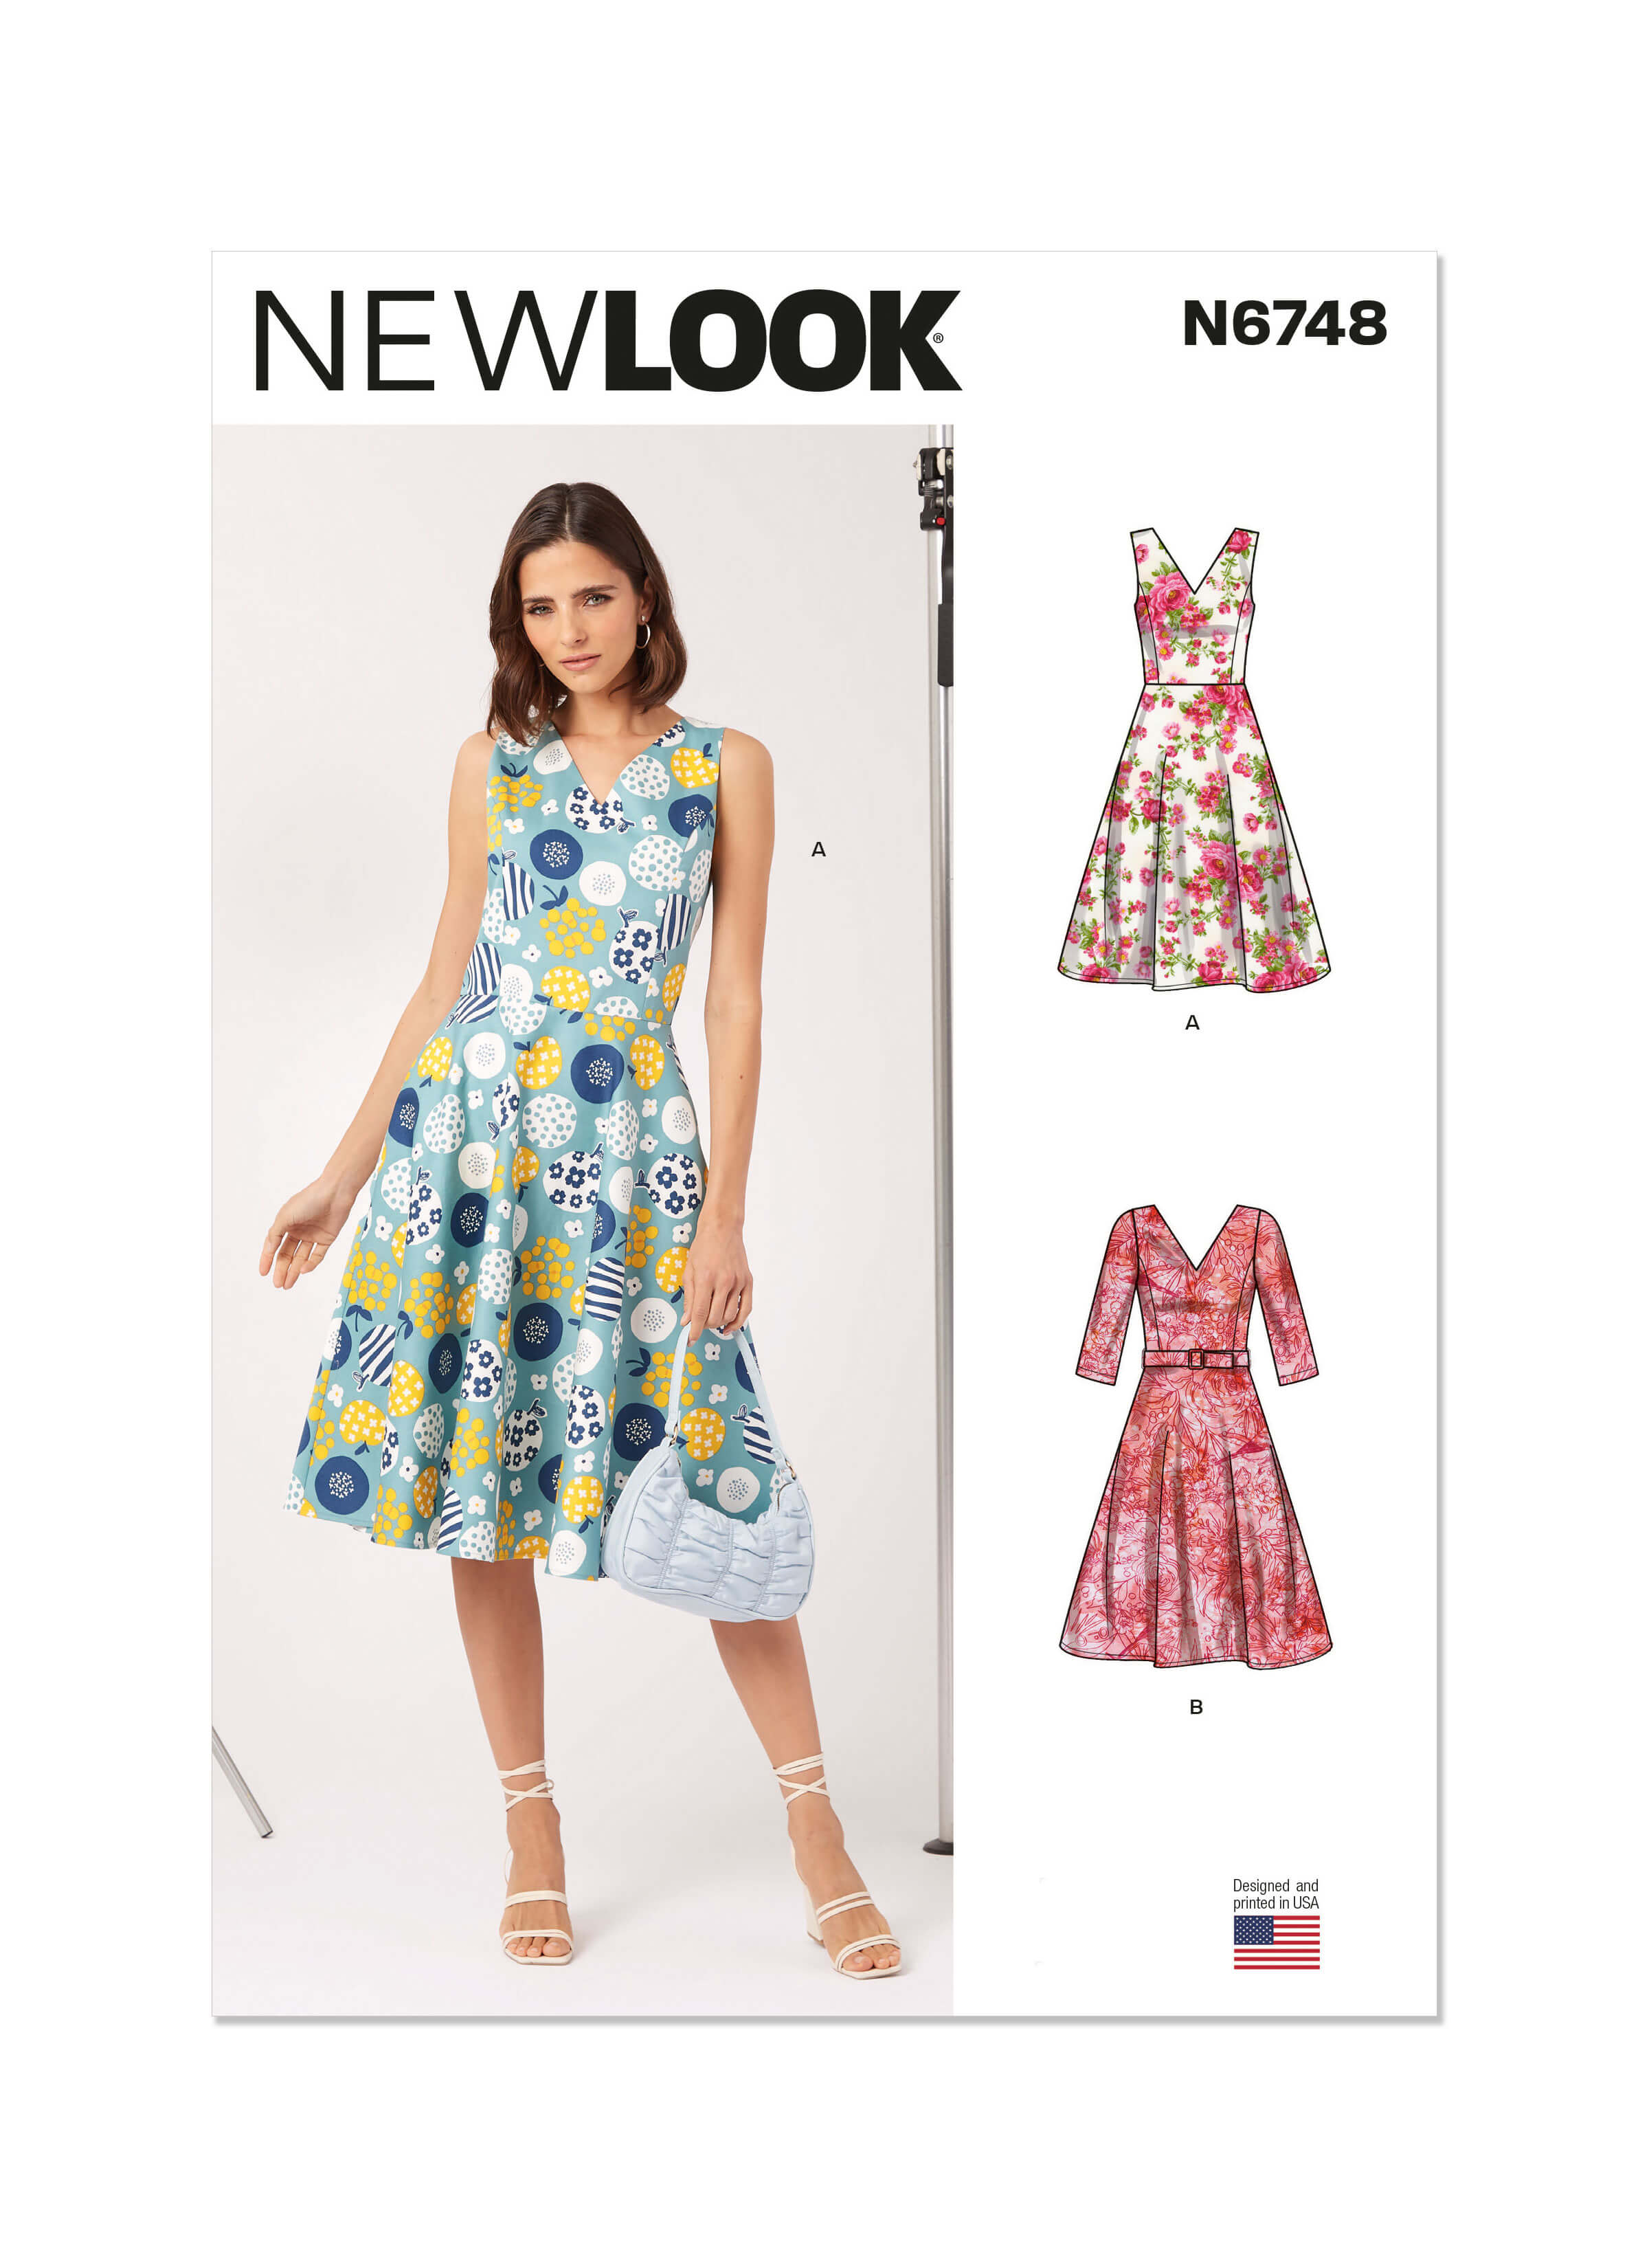 New Look Sewing Pattern N6748 Misses' Dress With Sleeve Variations